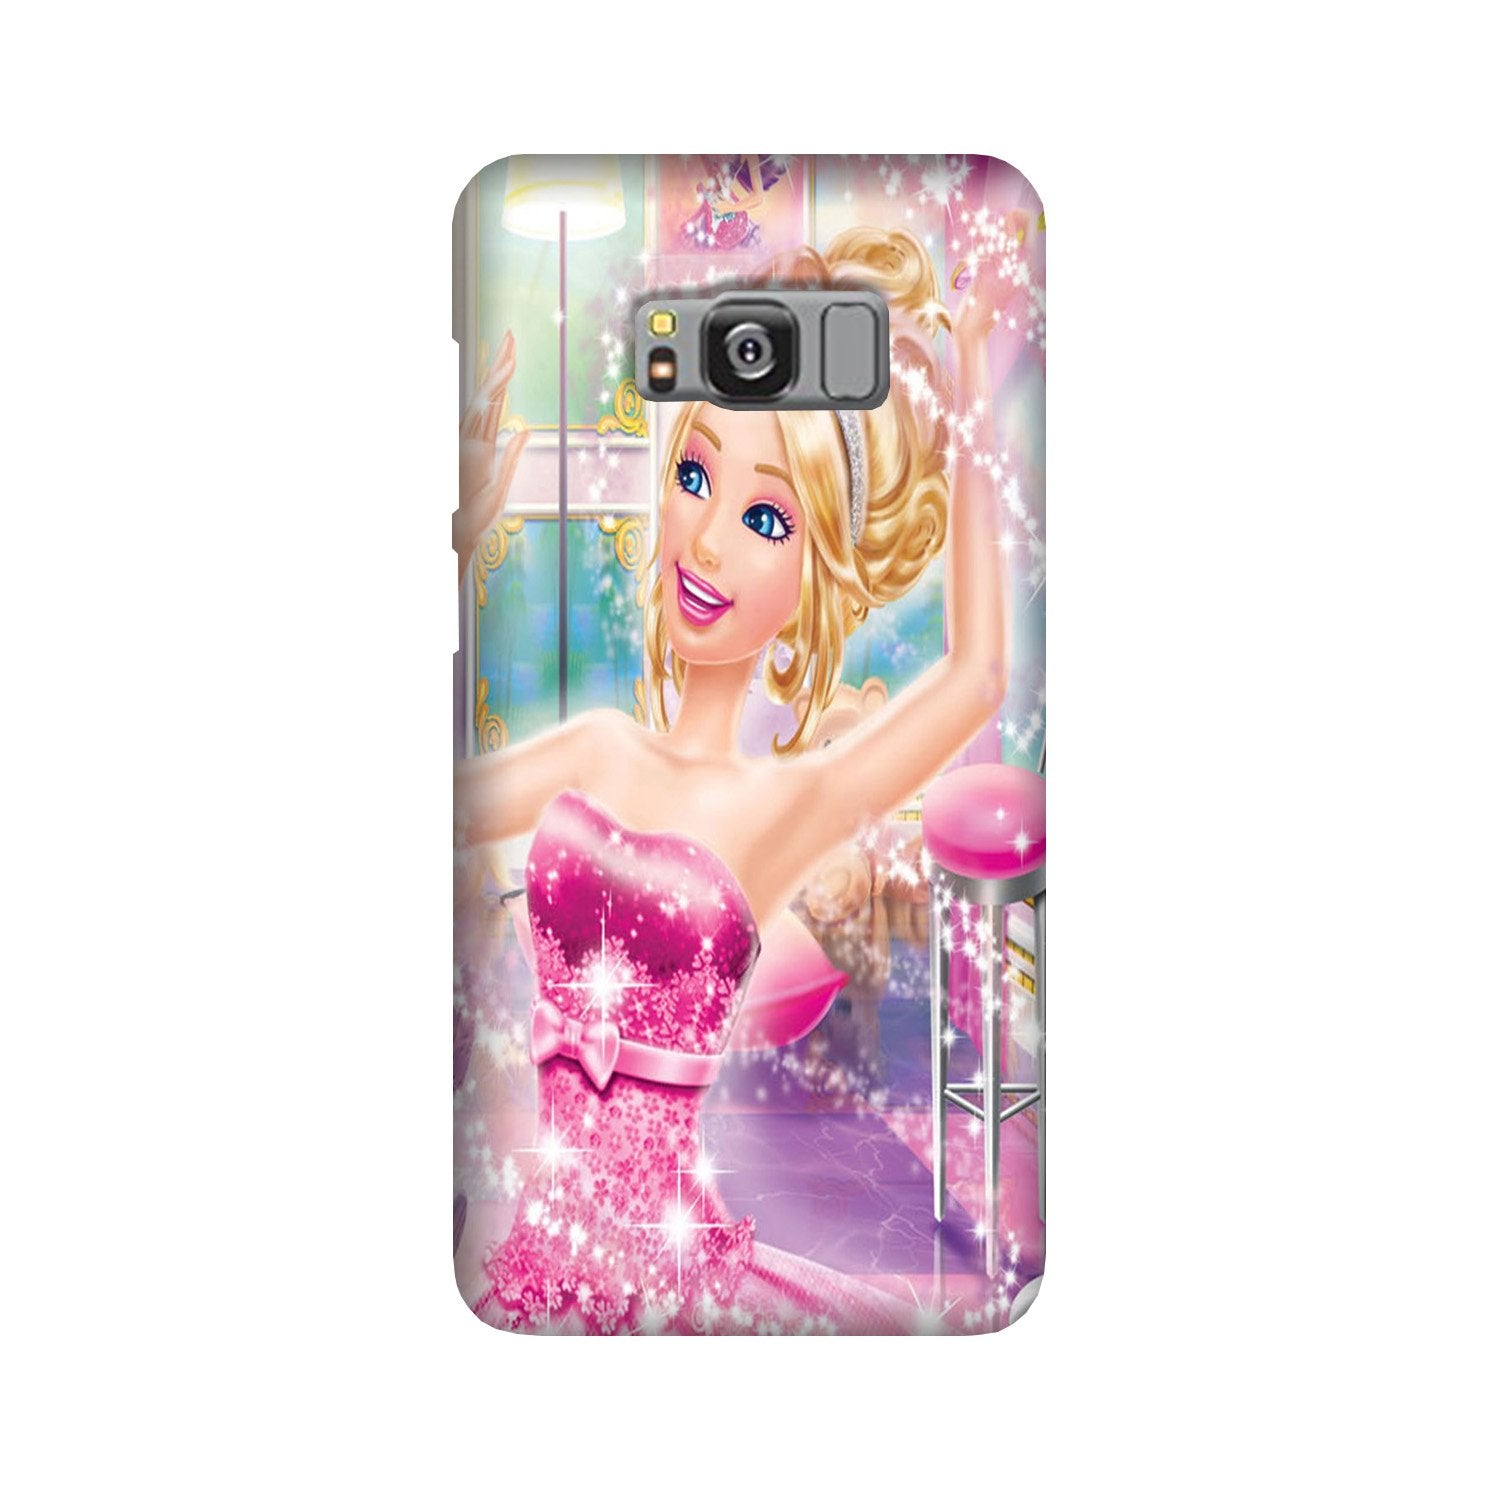 Princesses Case for Galaxy S8